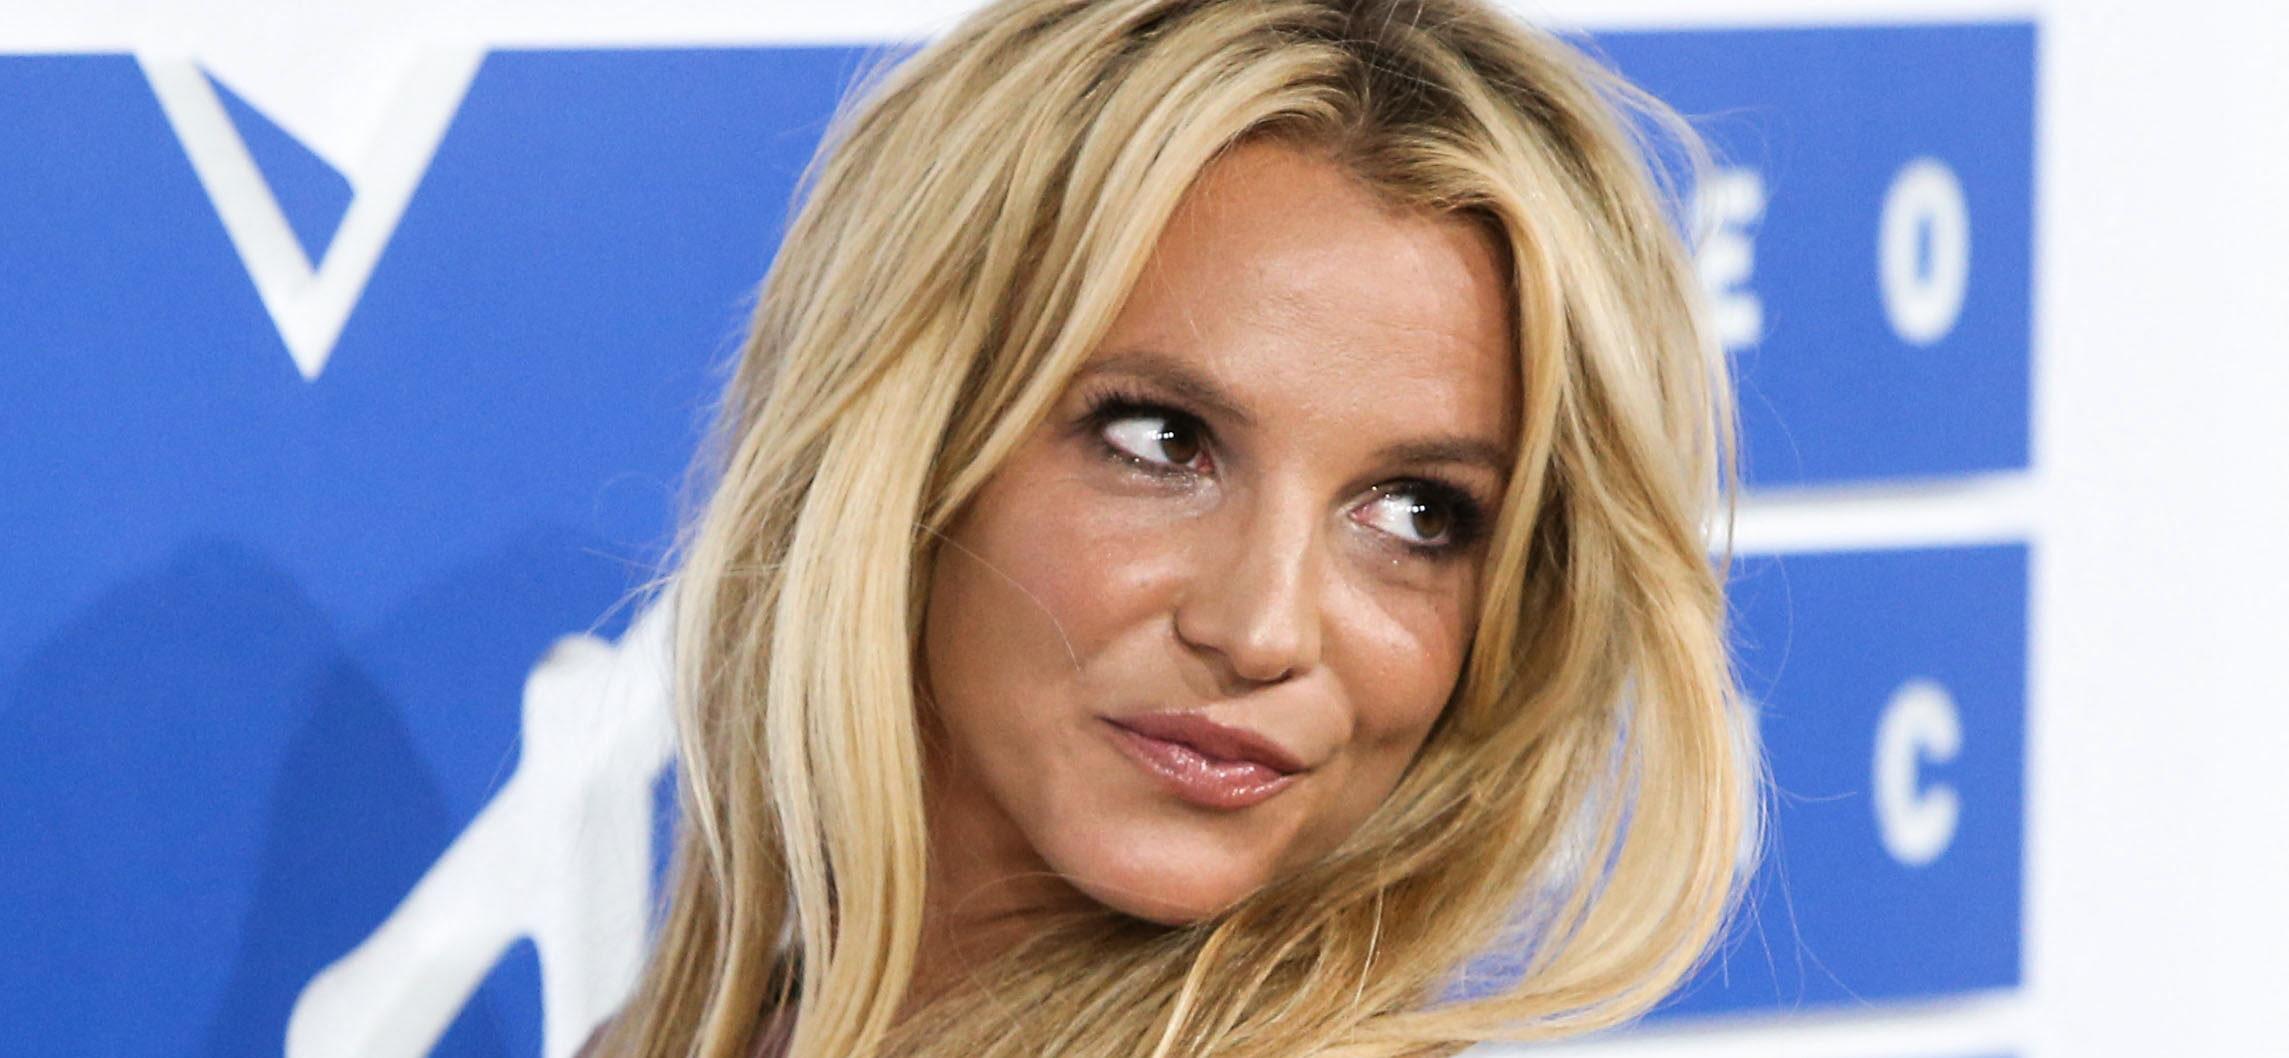 Britney Spears Laments ‘Years Of Me Crying’ Over Her Sons: ‘It’s Payback’